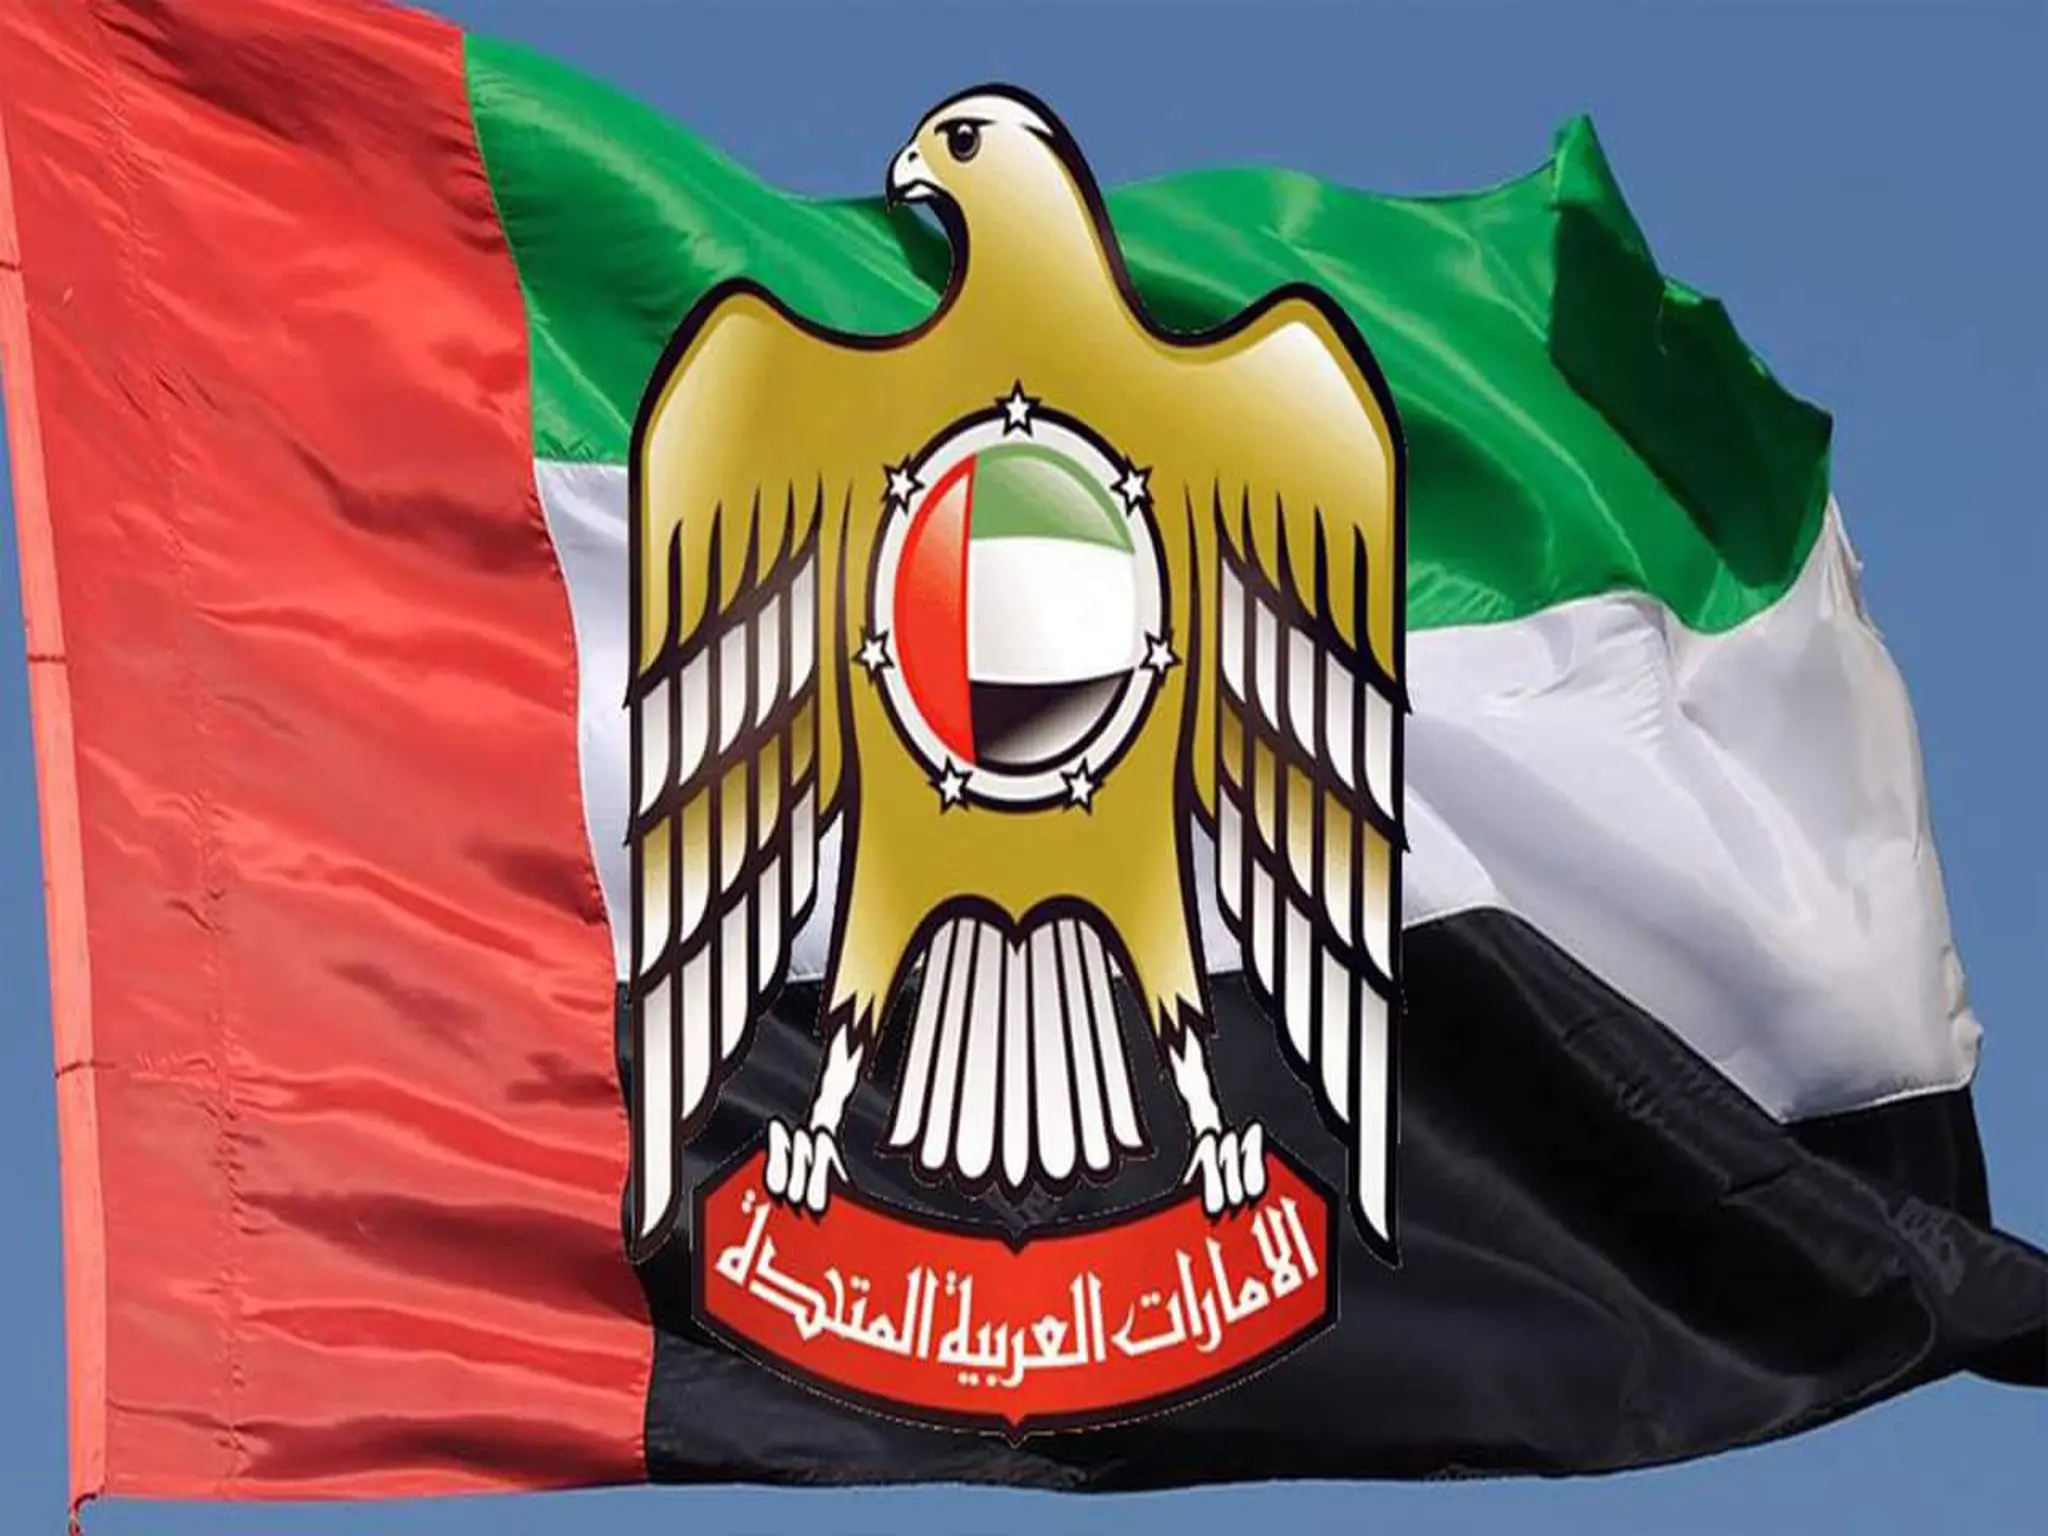 UAE: An important warning to all citizens and residents of the country this evening